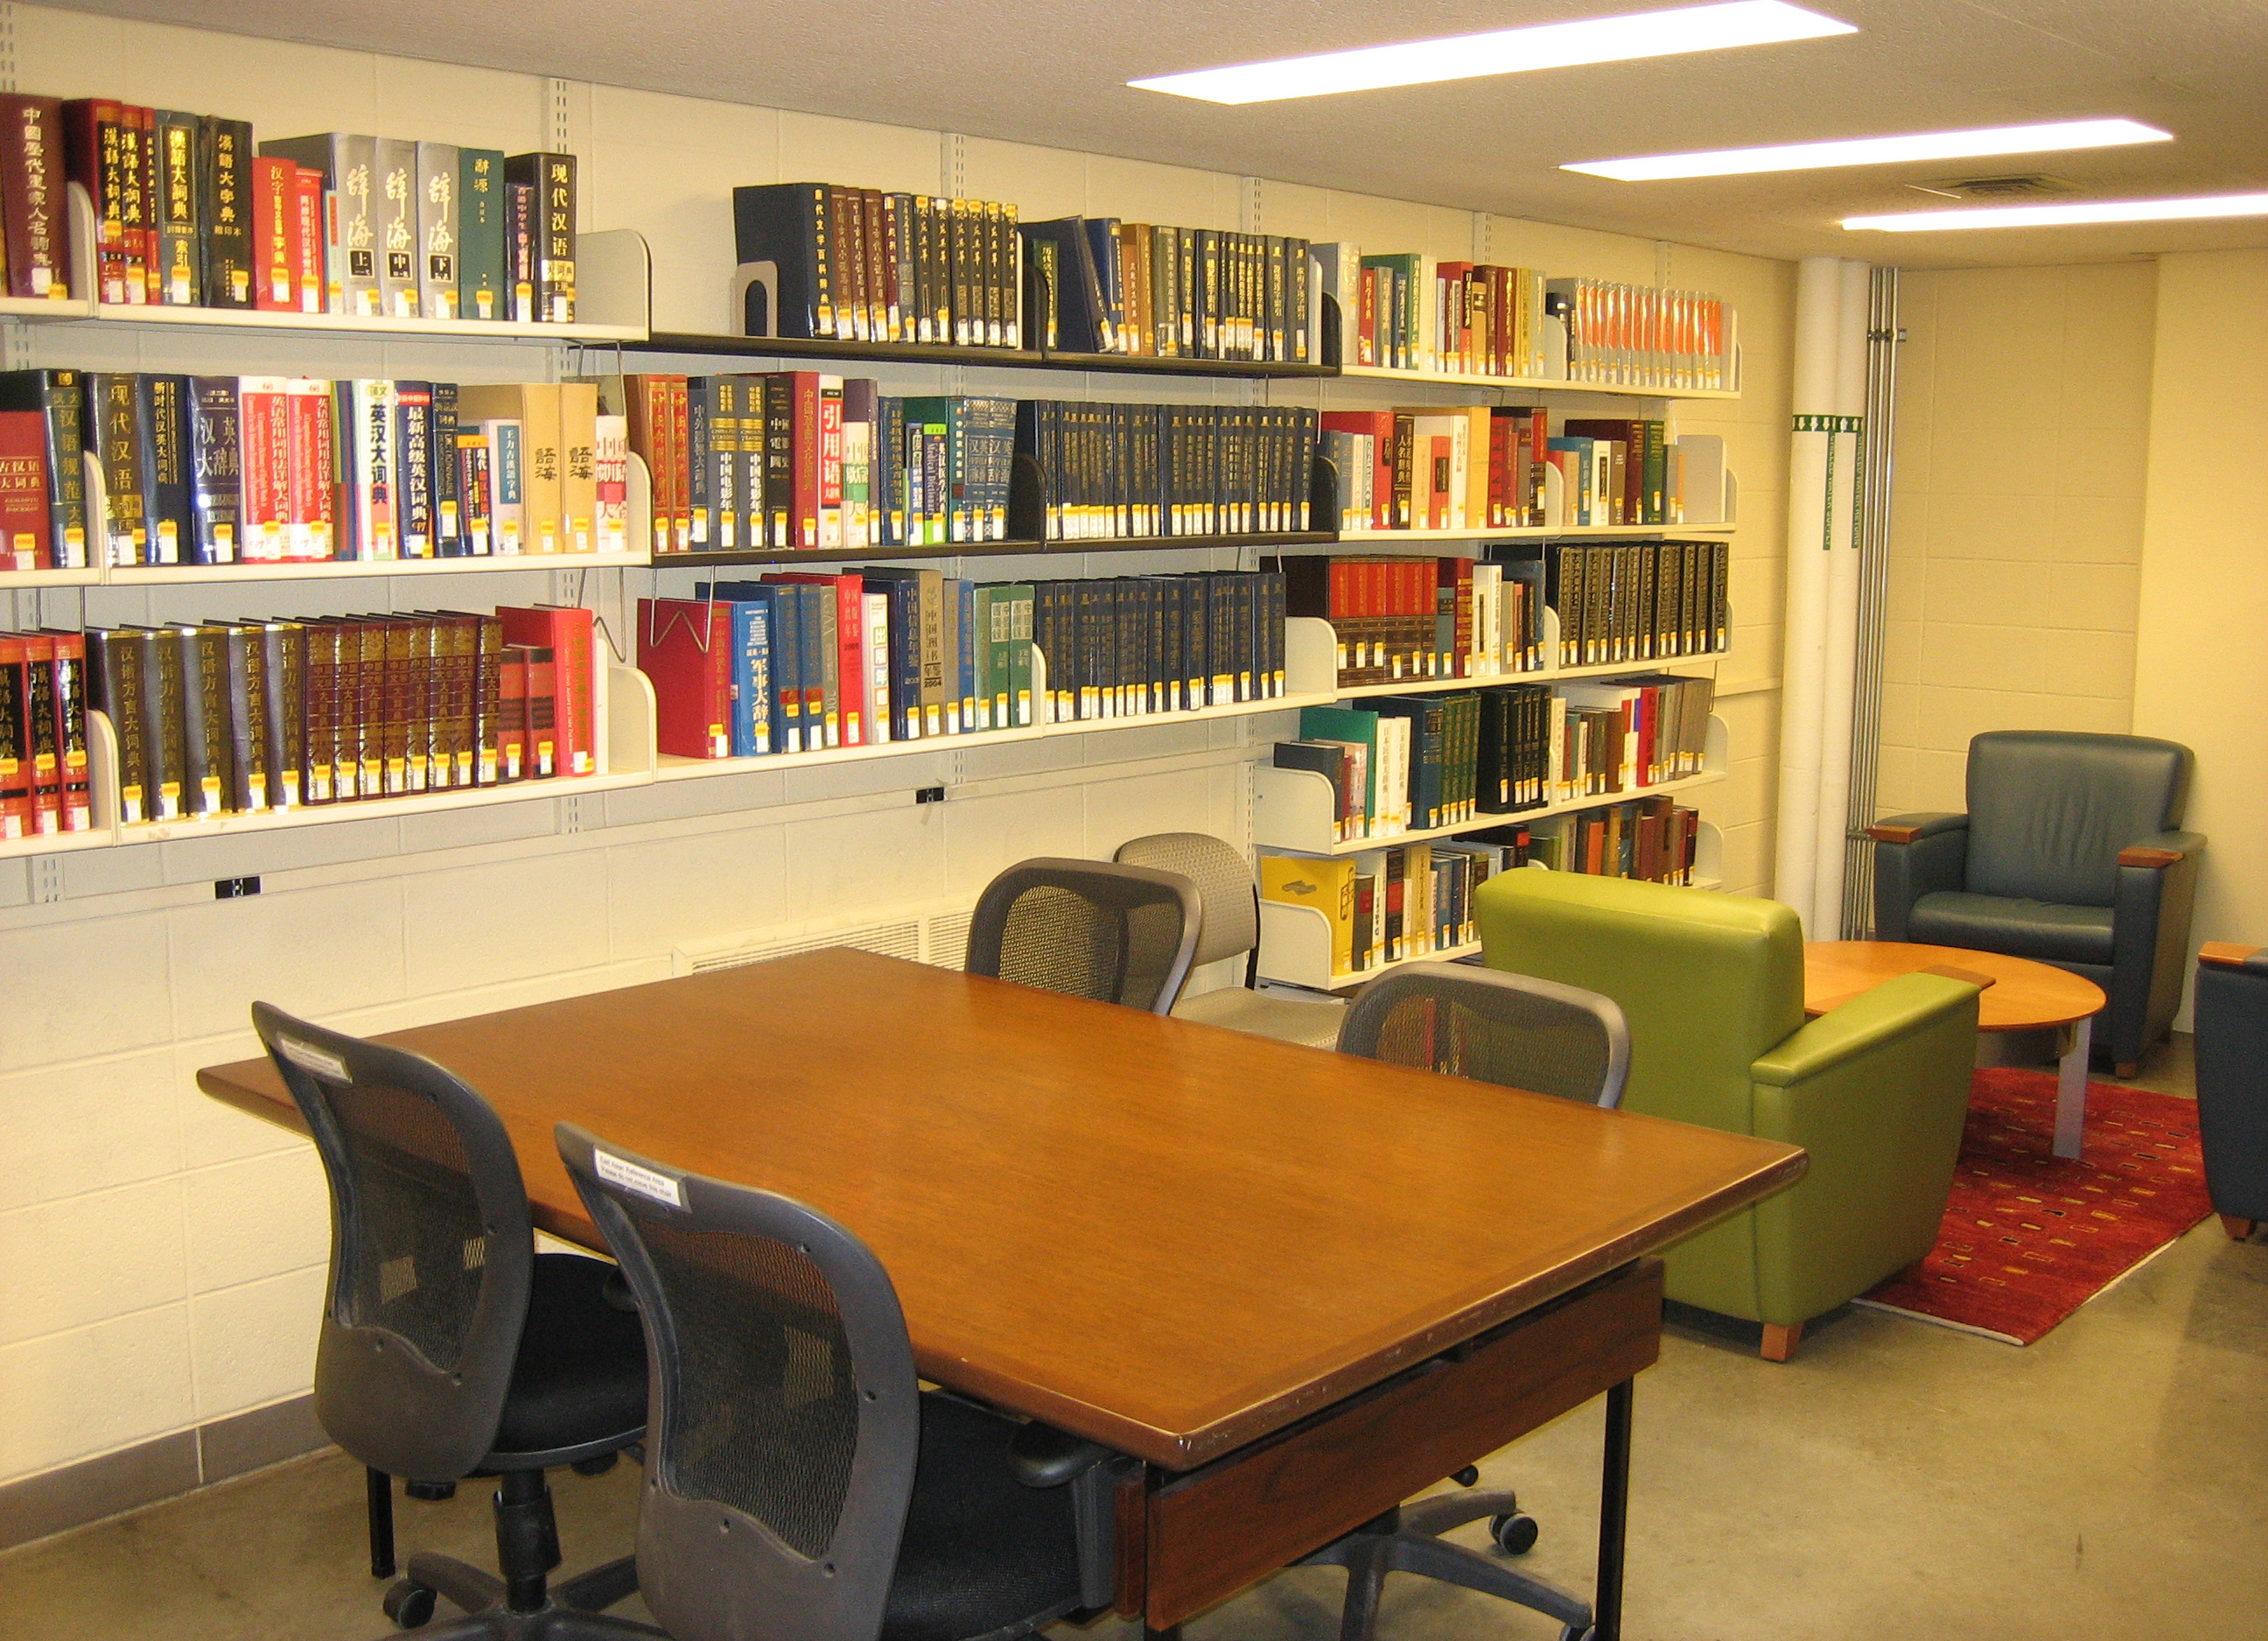 bookshelves, chairs, and worktables with fluorescent lighting